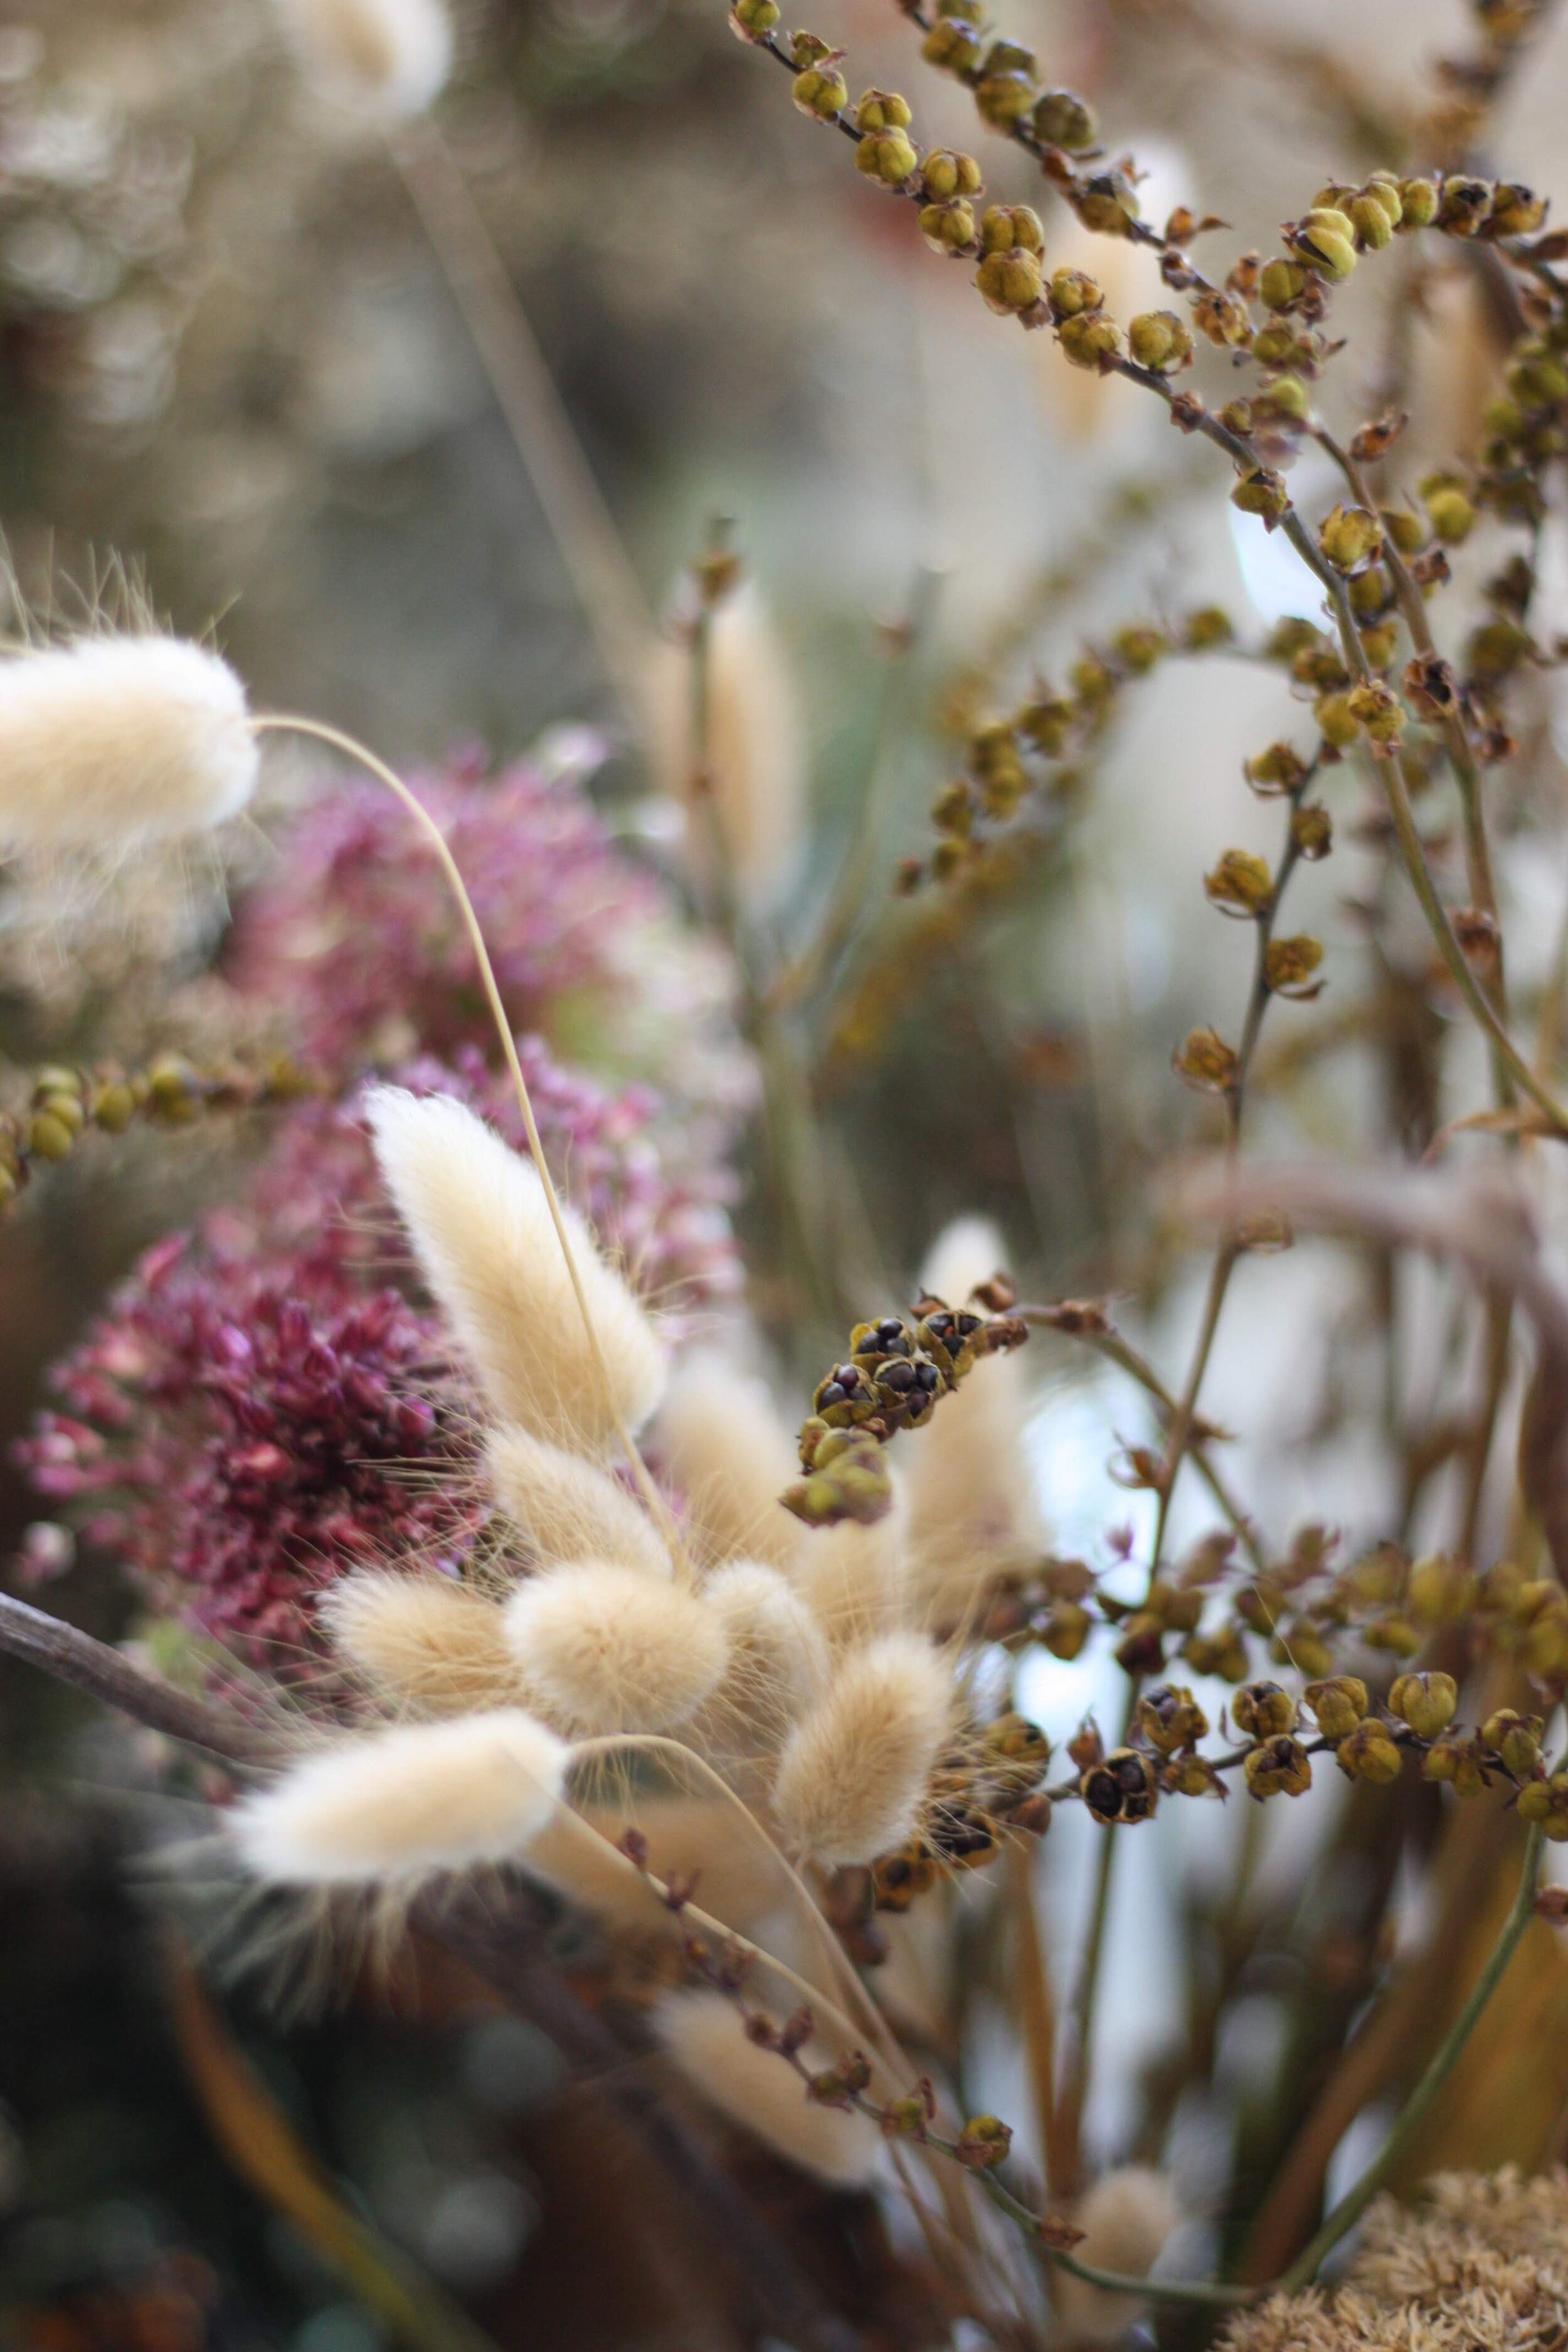 Explaining dried flowers textural and timeless - The Botanist